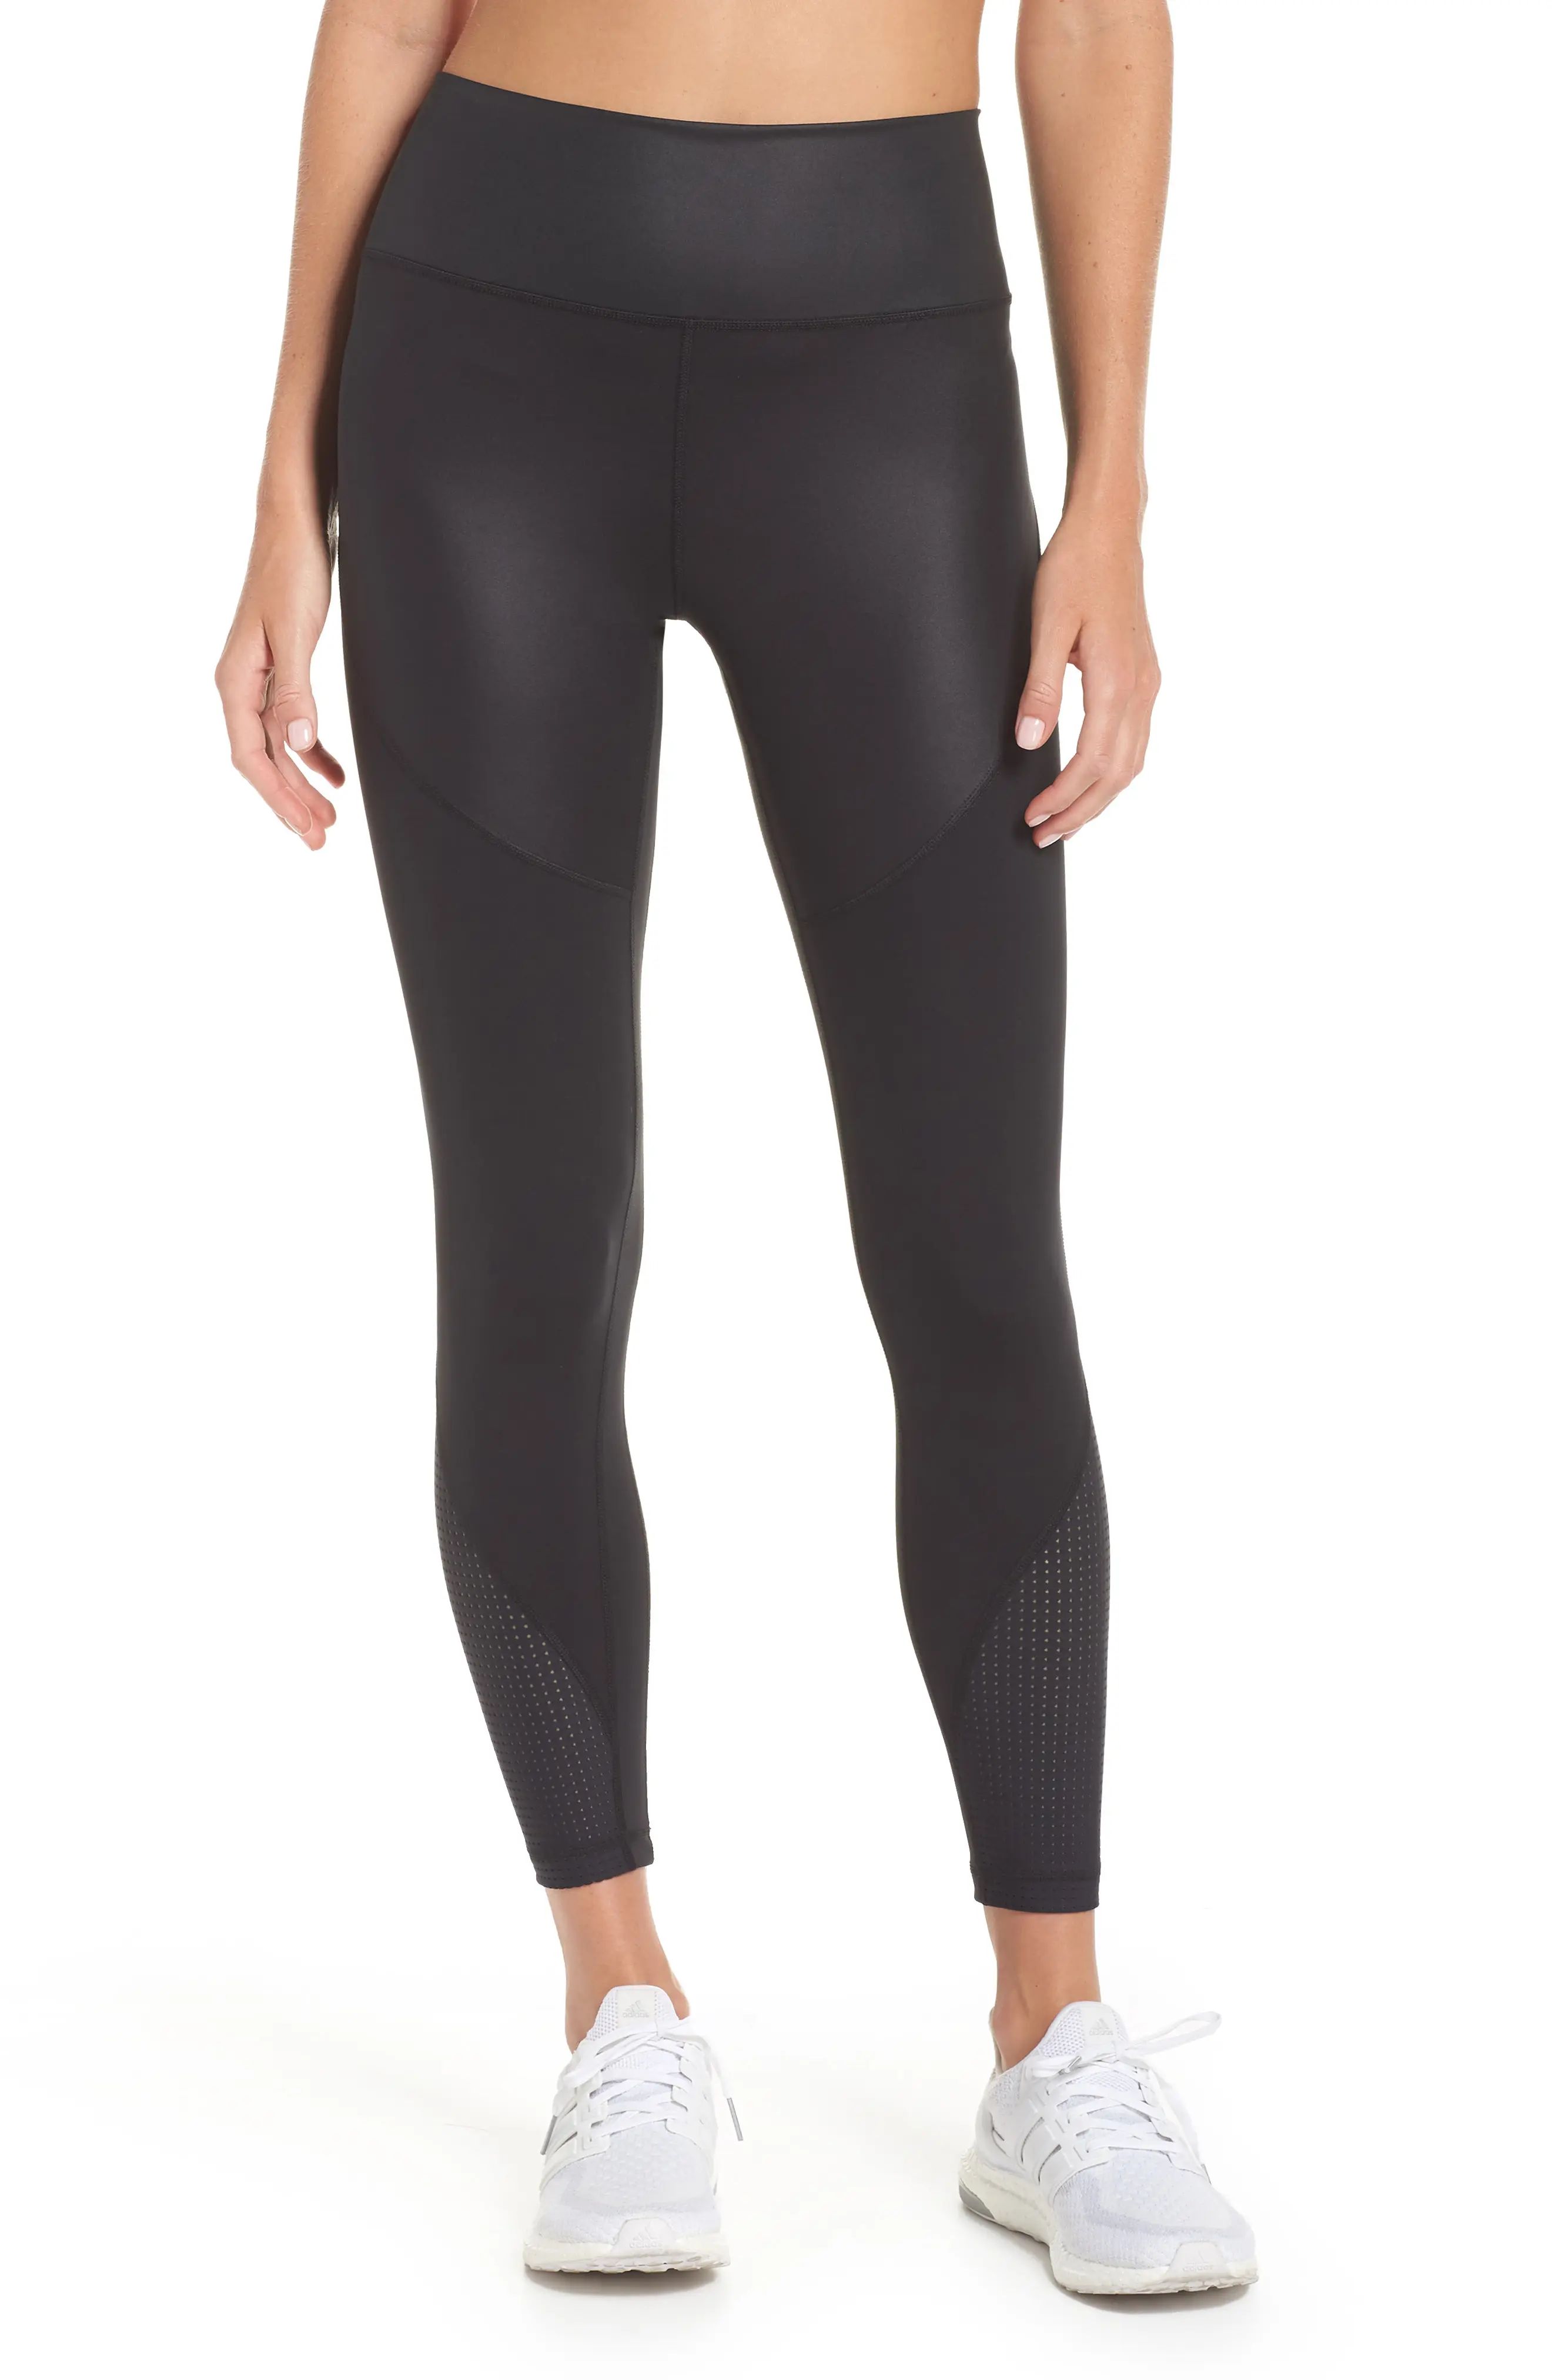 adidas Believe This Shiny High Waist Tights | Nordstrom